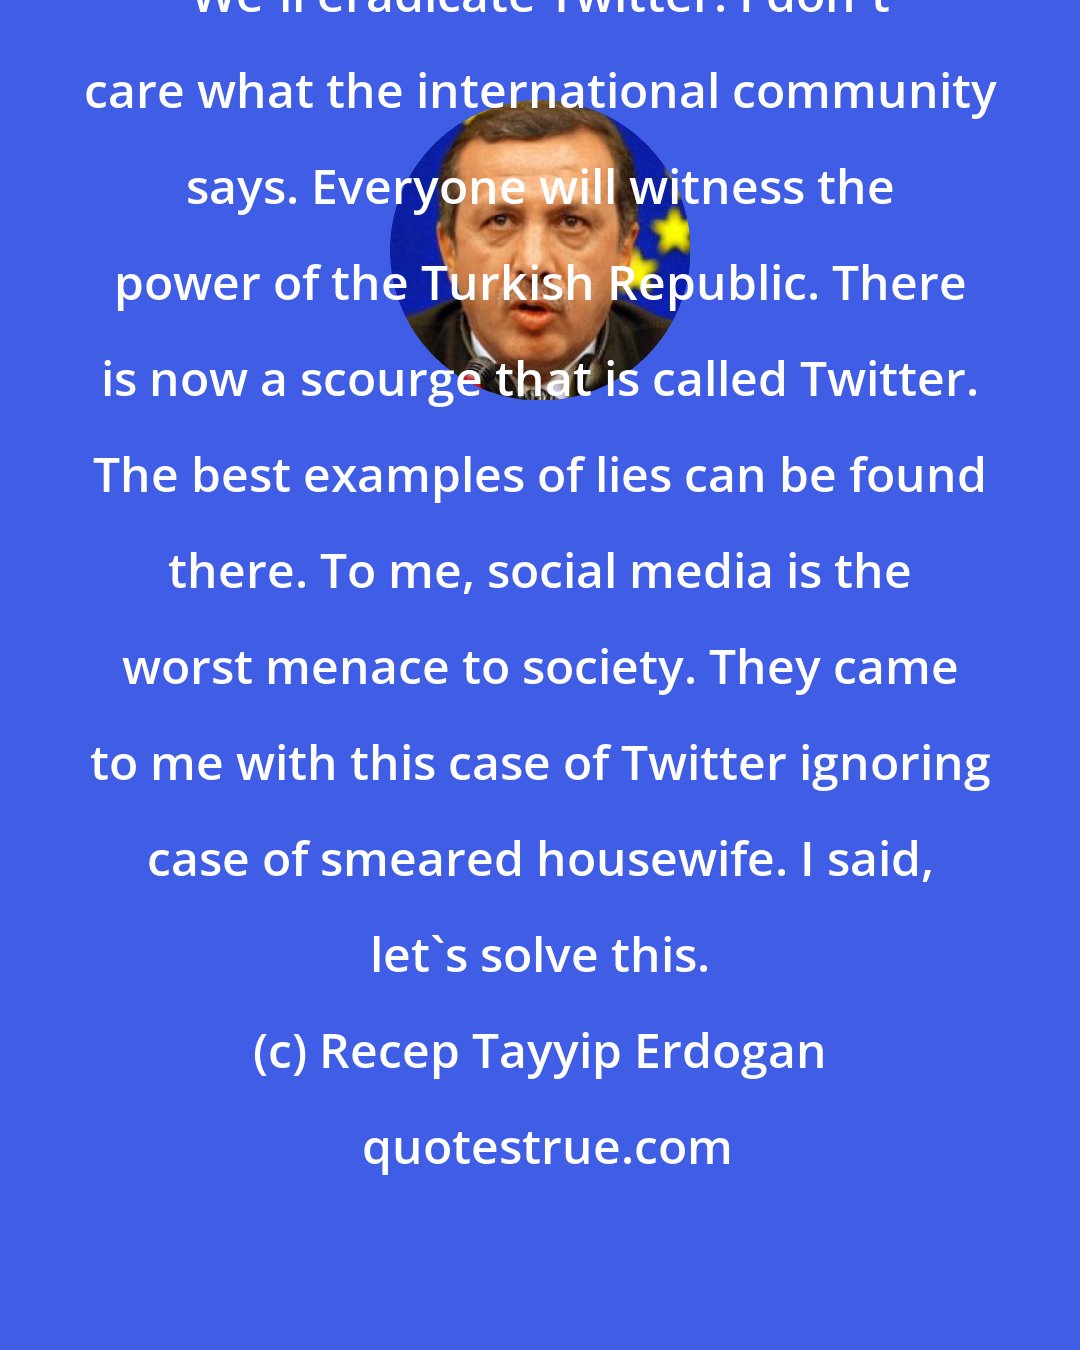 Recep Tayyip Erdogan: We'll eradicate Twitter. I don't care what the international community says. Everyone will witness the power of the Turkish Republic. There is now a scourge that is called Twitter. The best examples of lies can be found there. To me, social media is the worst menace to society. They came to me with this case of Twitter ignoring case of smeared housewife. I said, let's solve this.